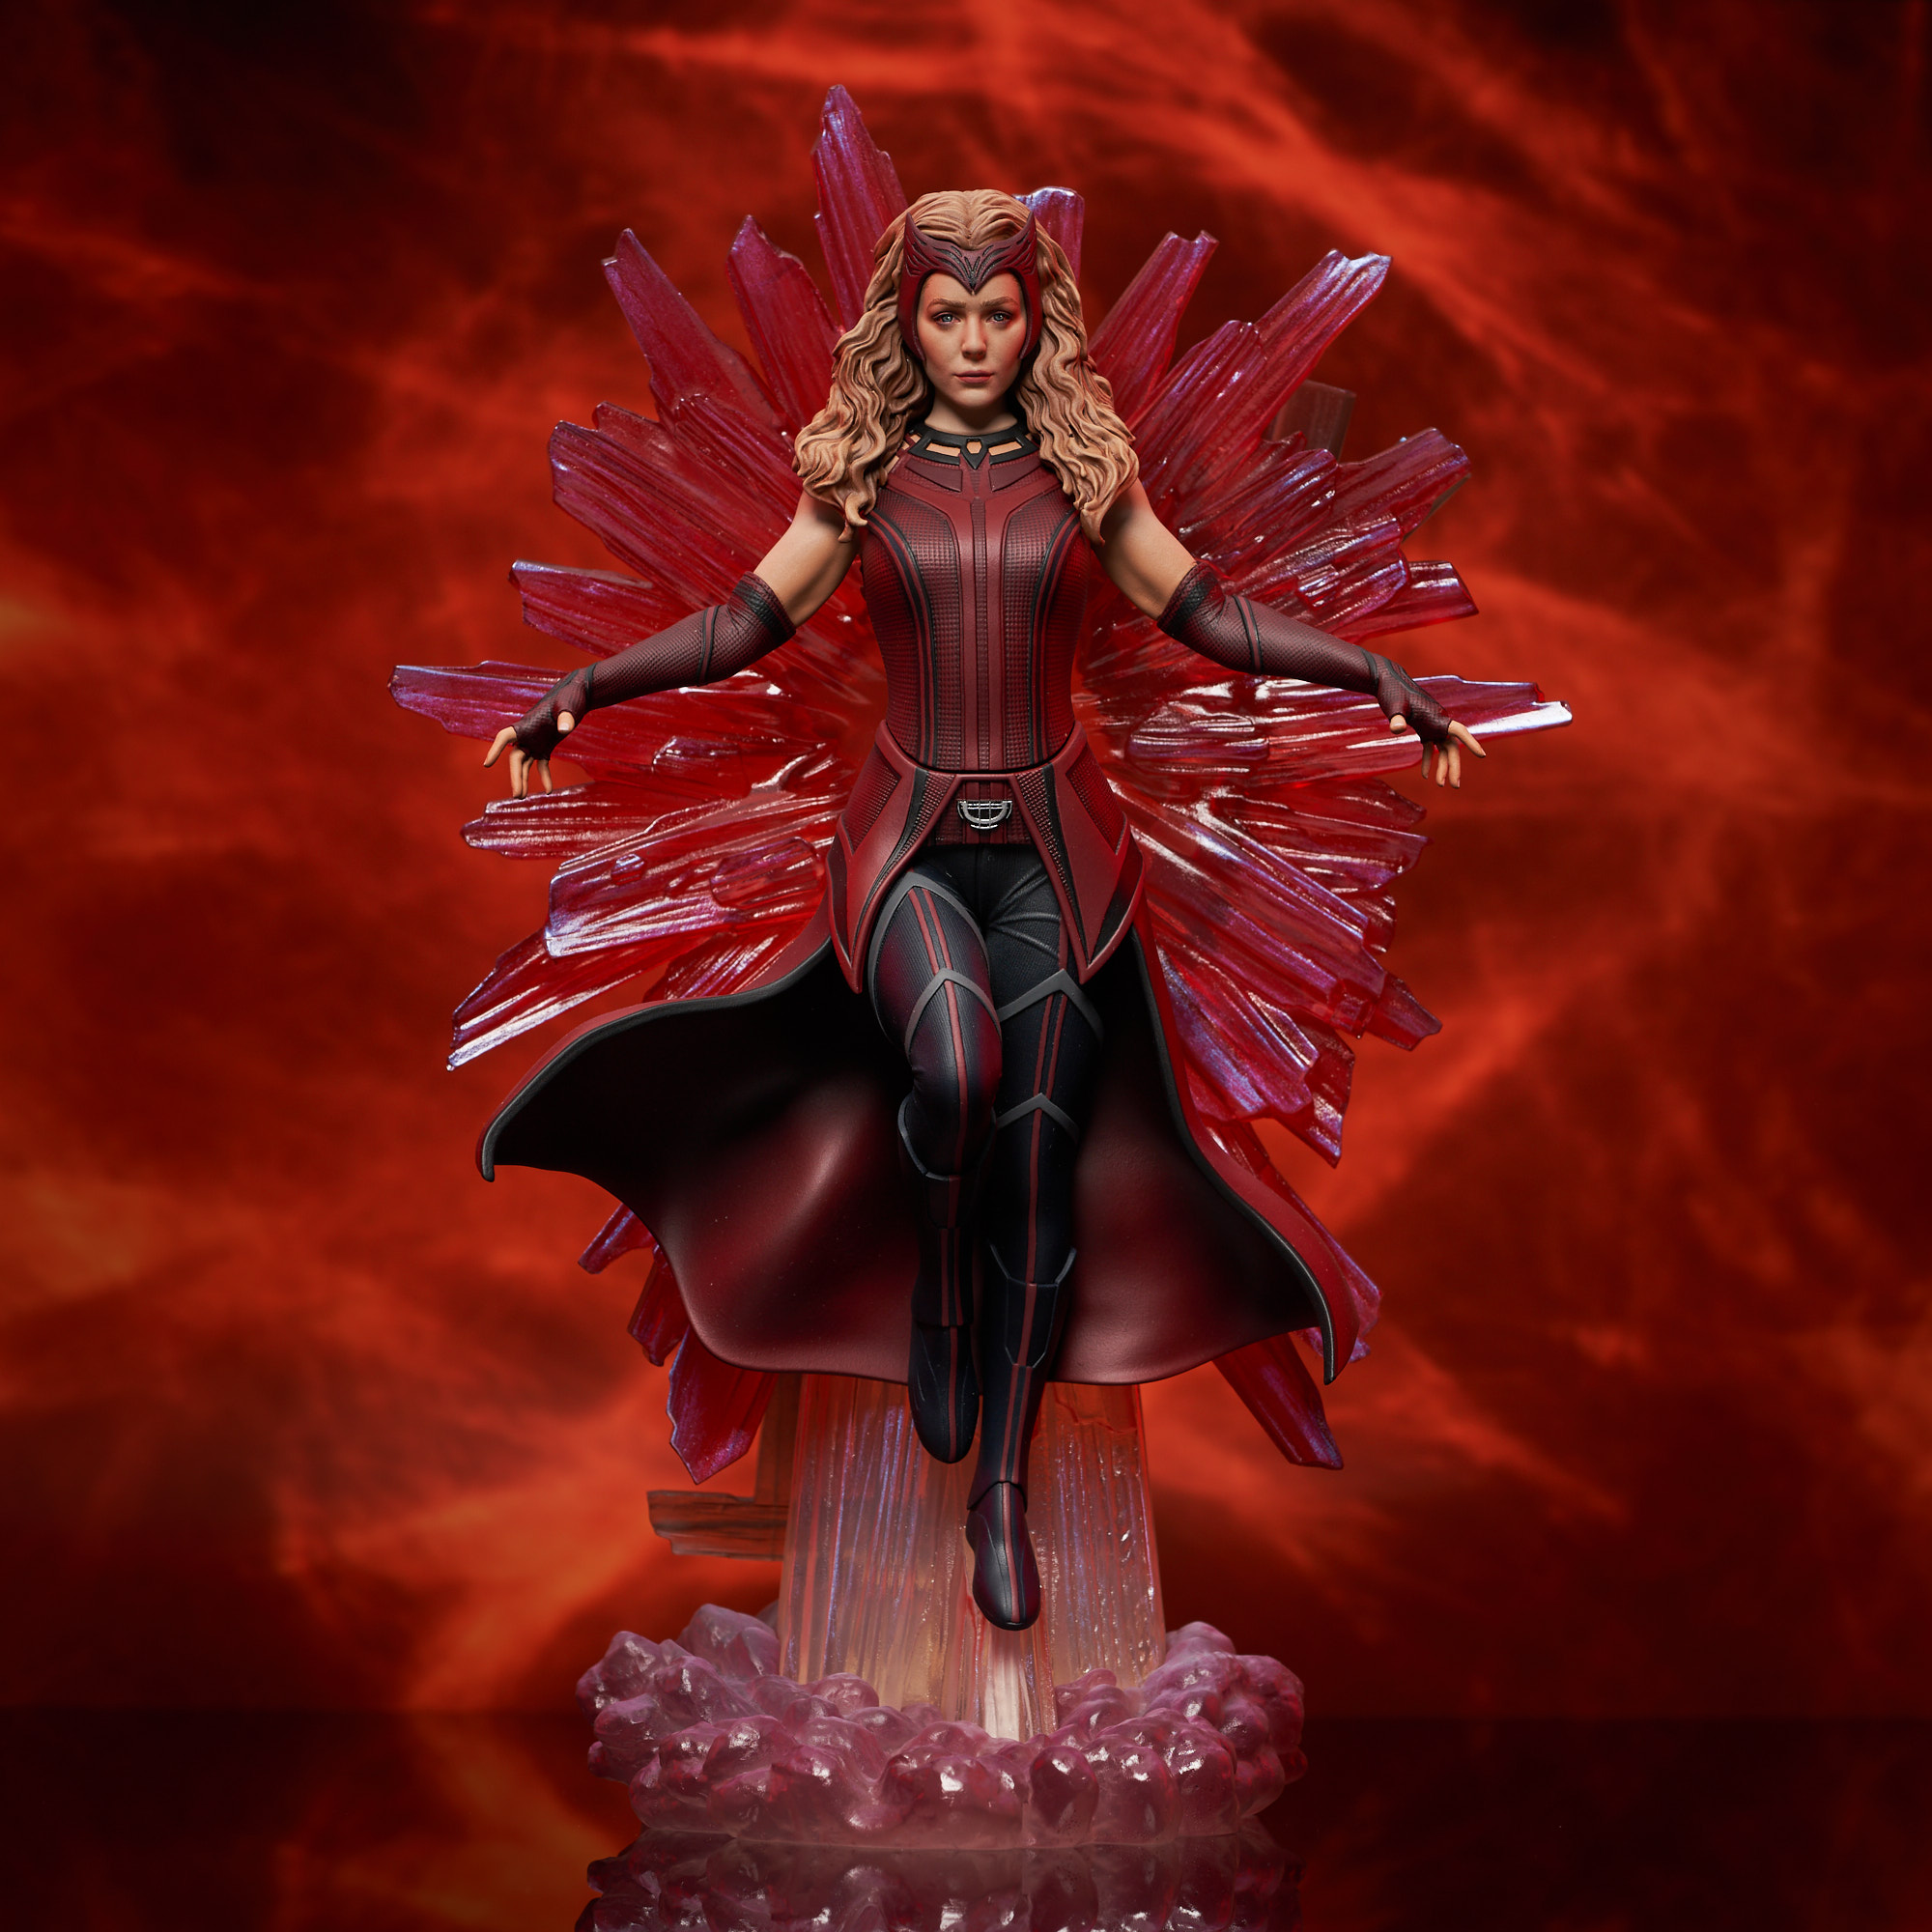 How Powerful is The Scarlet Witch?